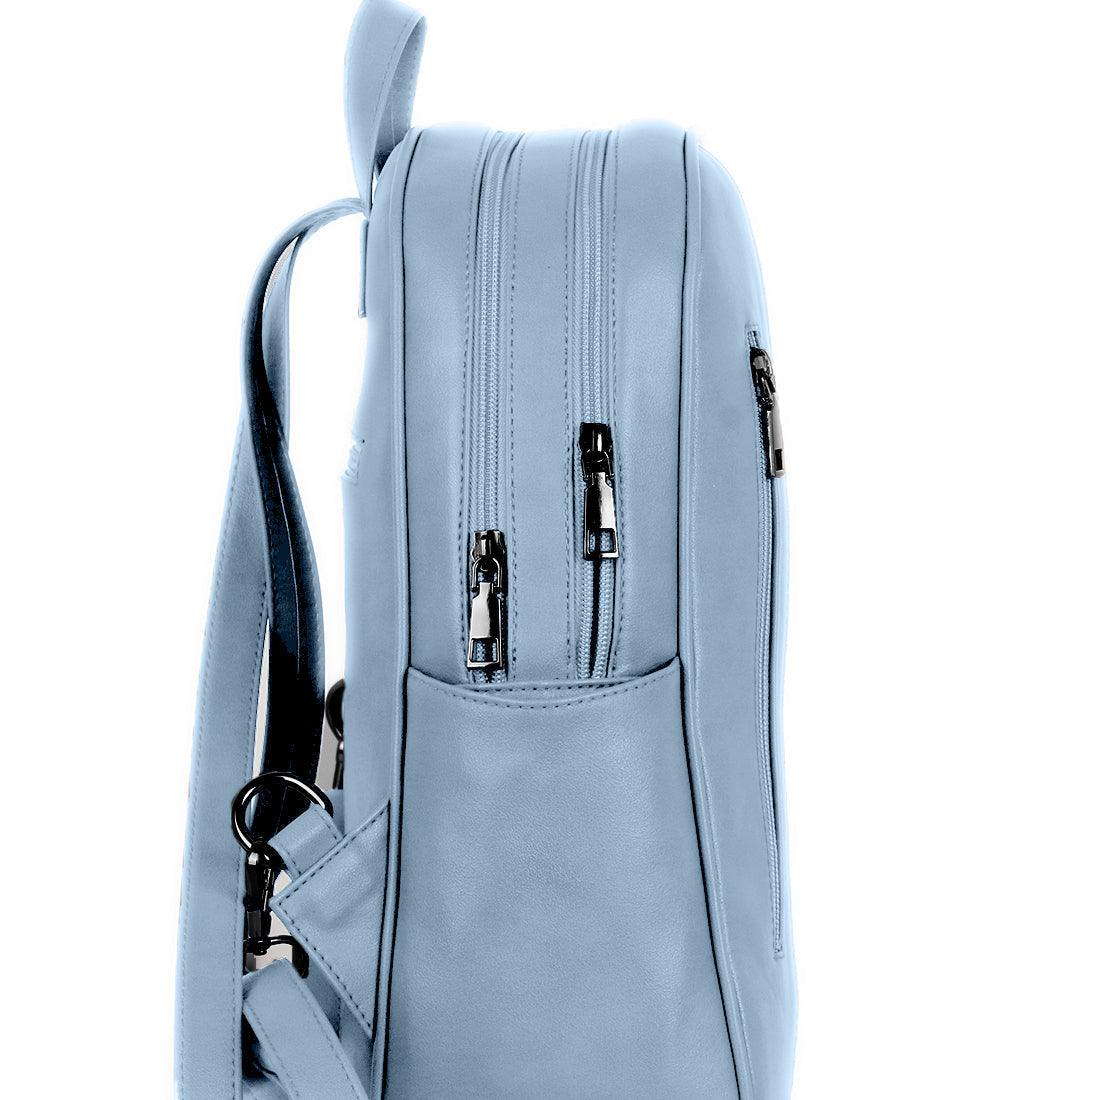 Blue Mixed Backpack Spiral - CANVAEGYPT